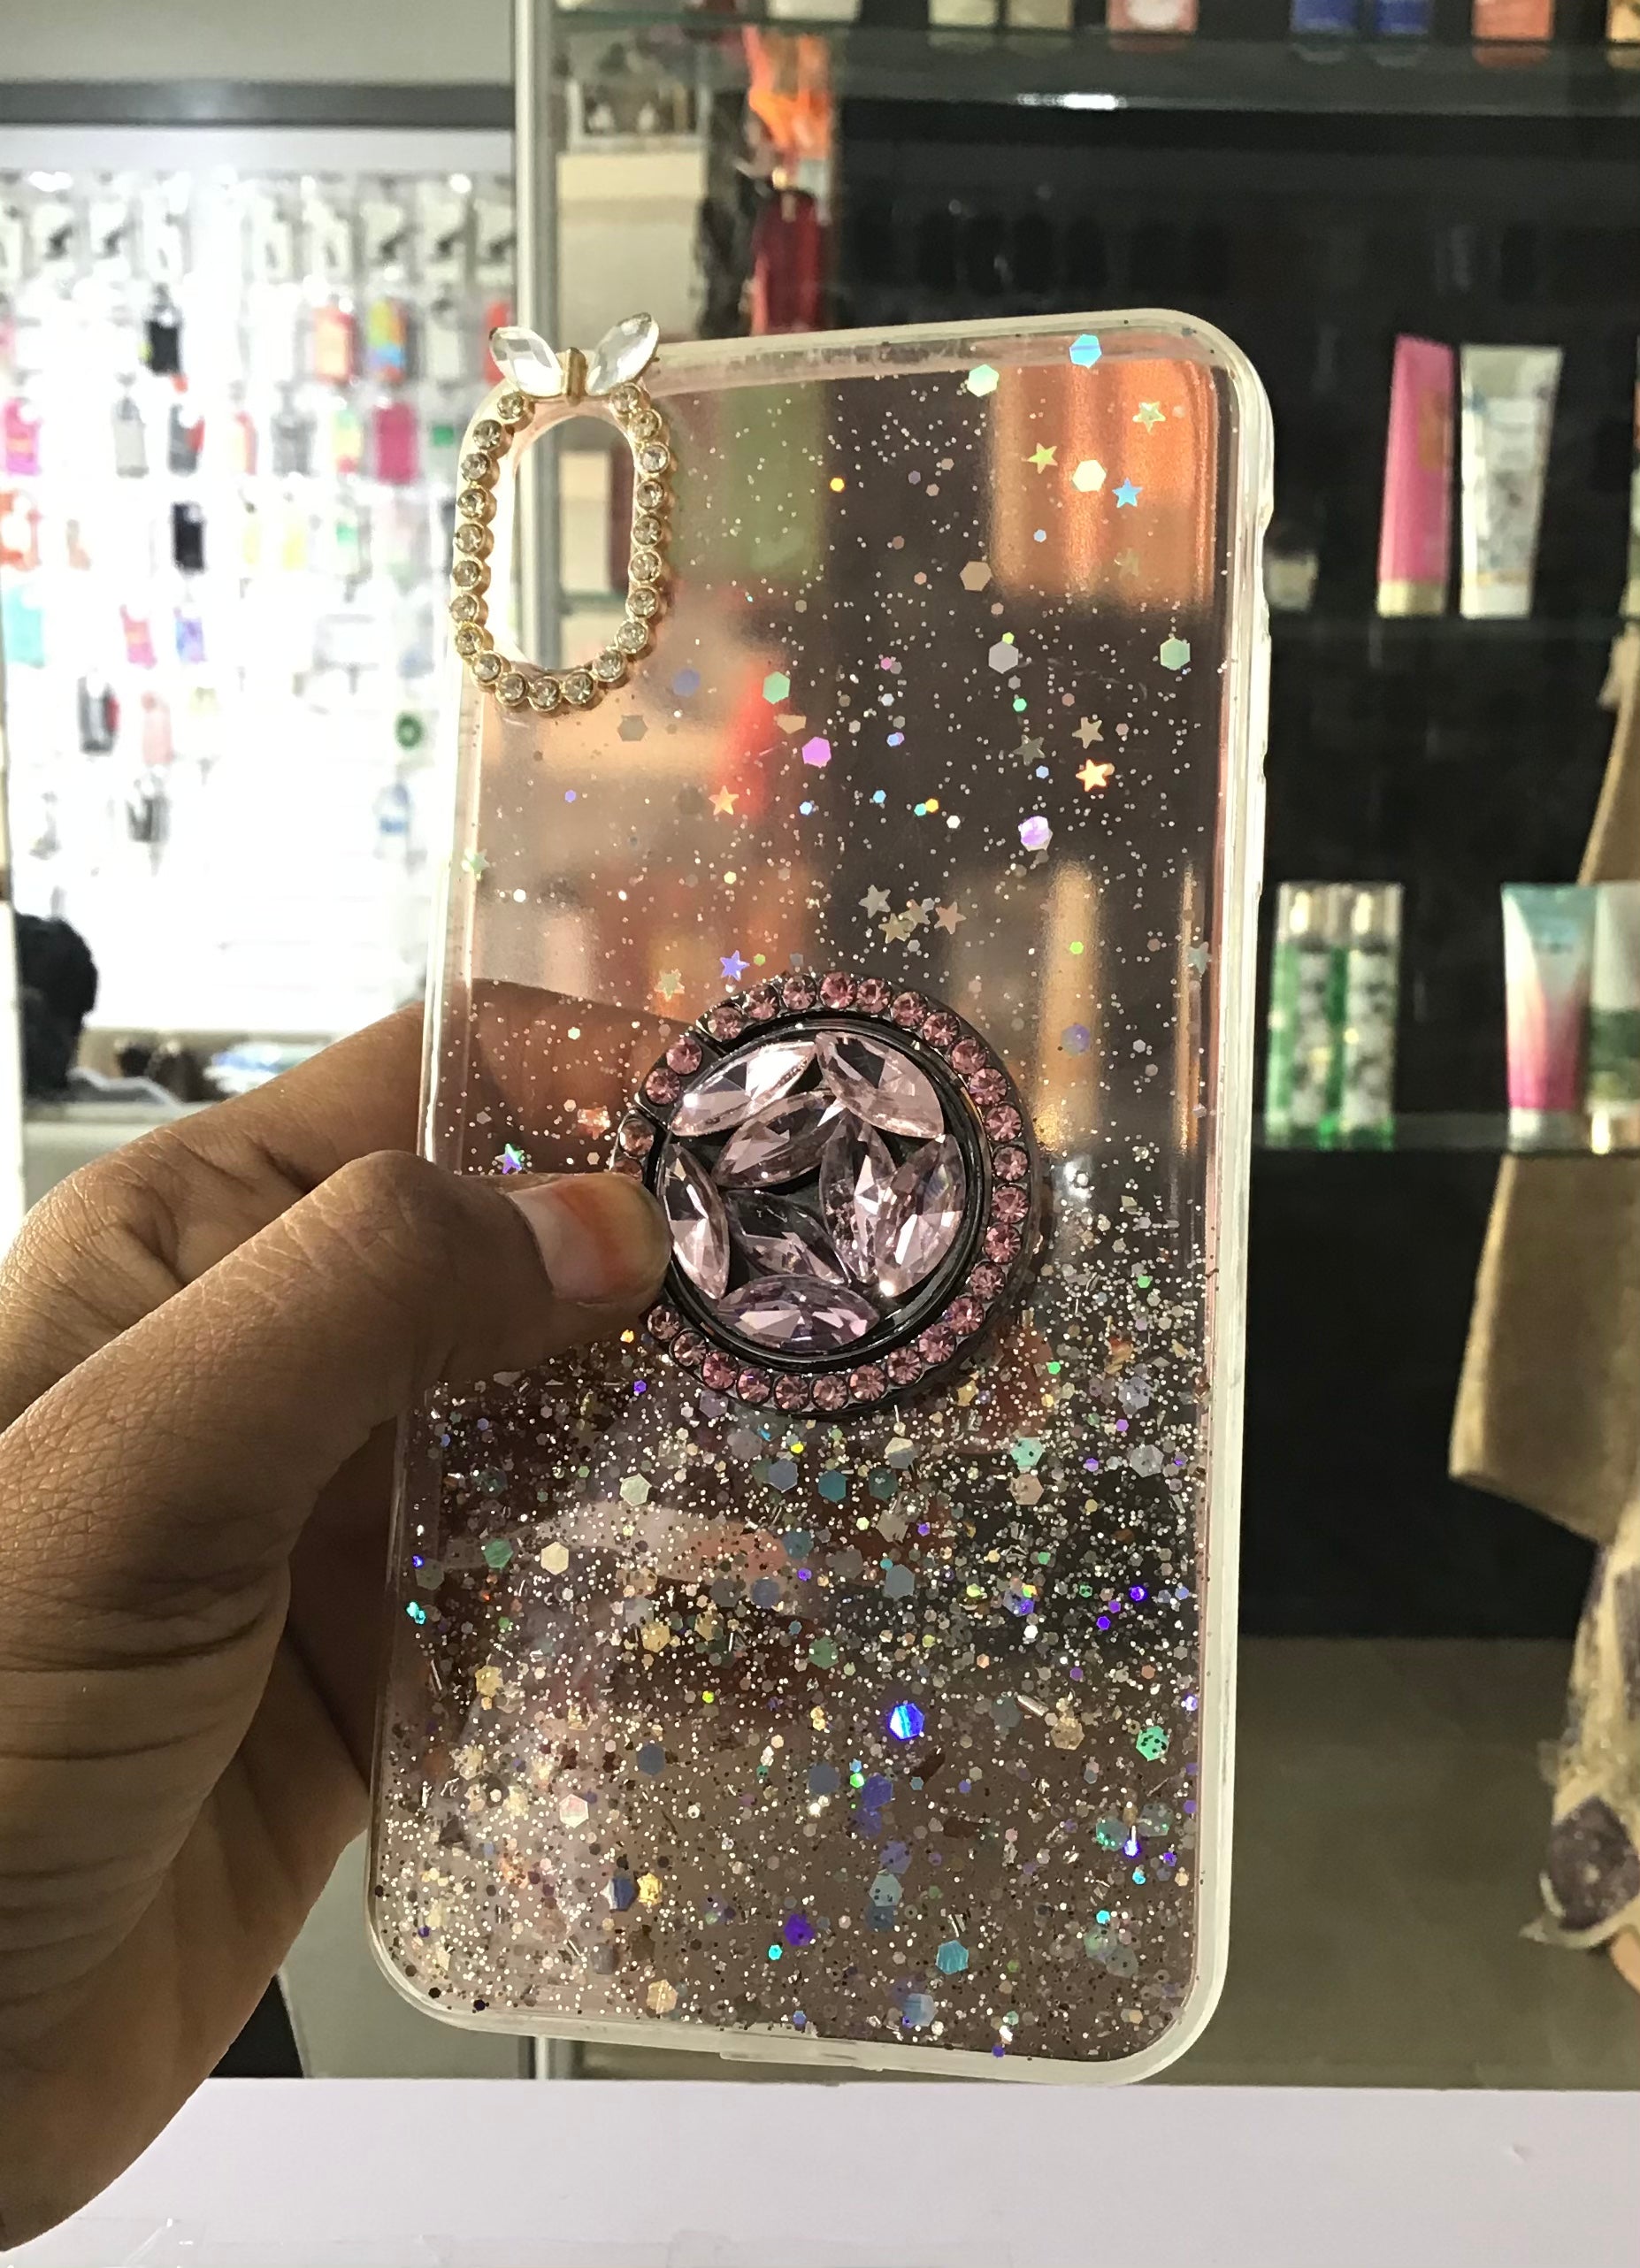 Peach Glitter Luxury With Grip Case For iPhone XS Max